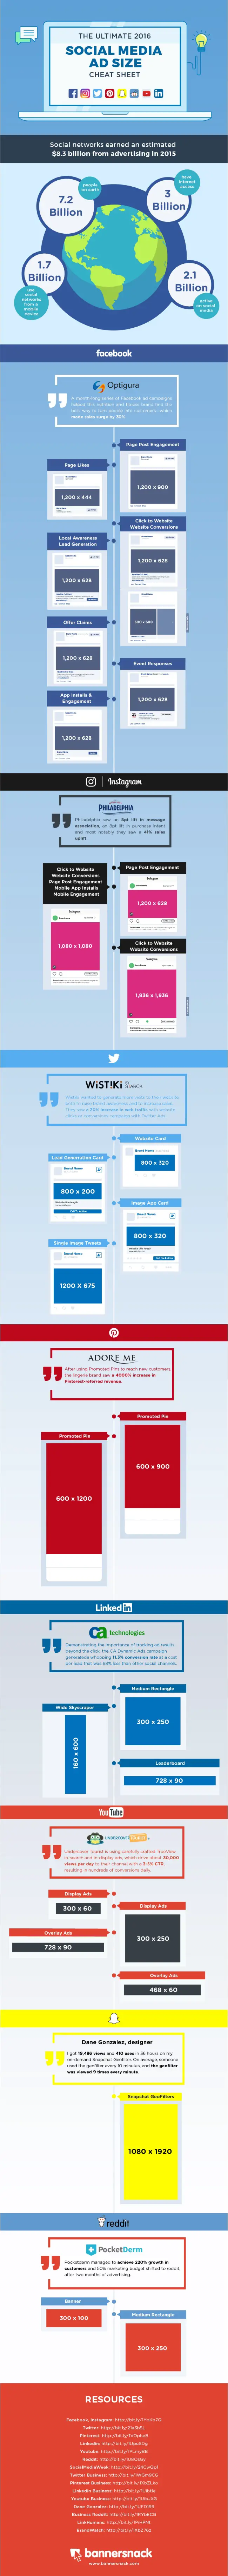 wersm-bannersnack-social-media-ad-sizes-a-cheat-sheet